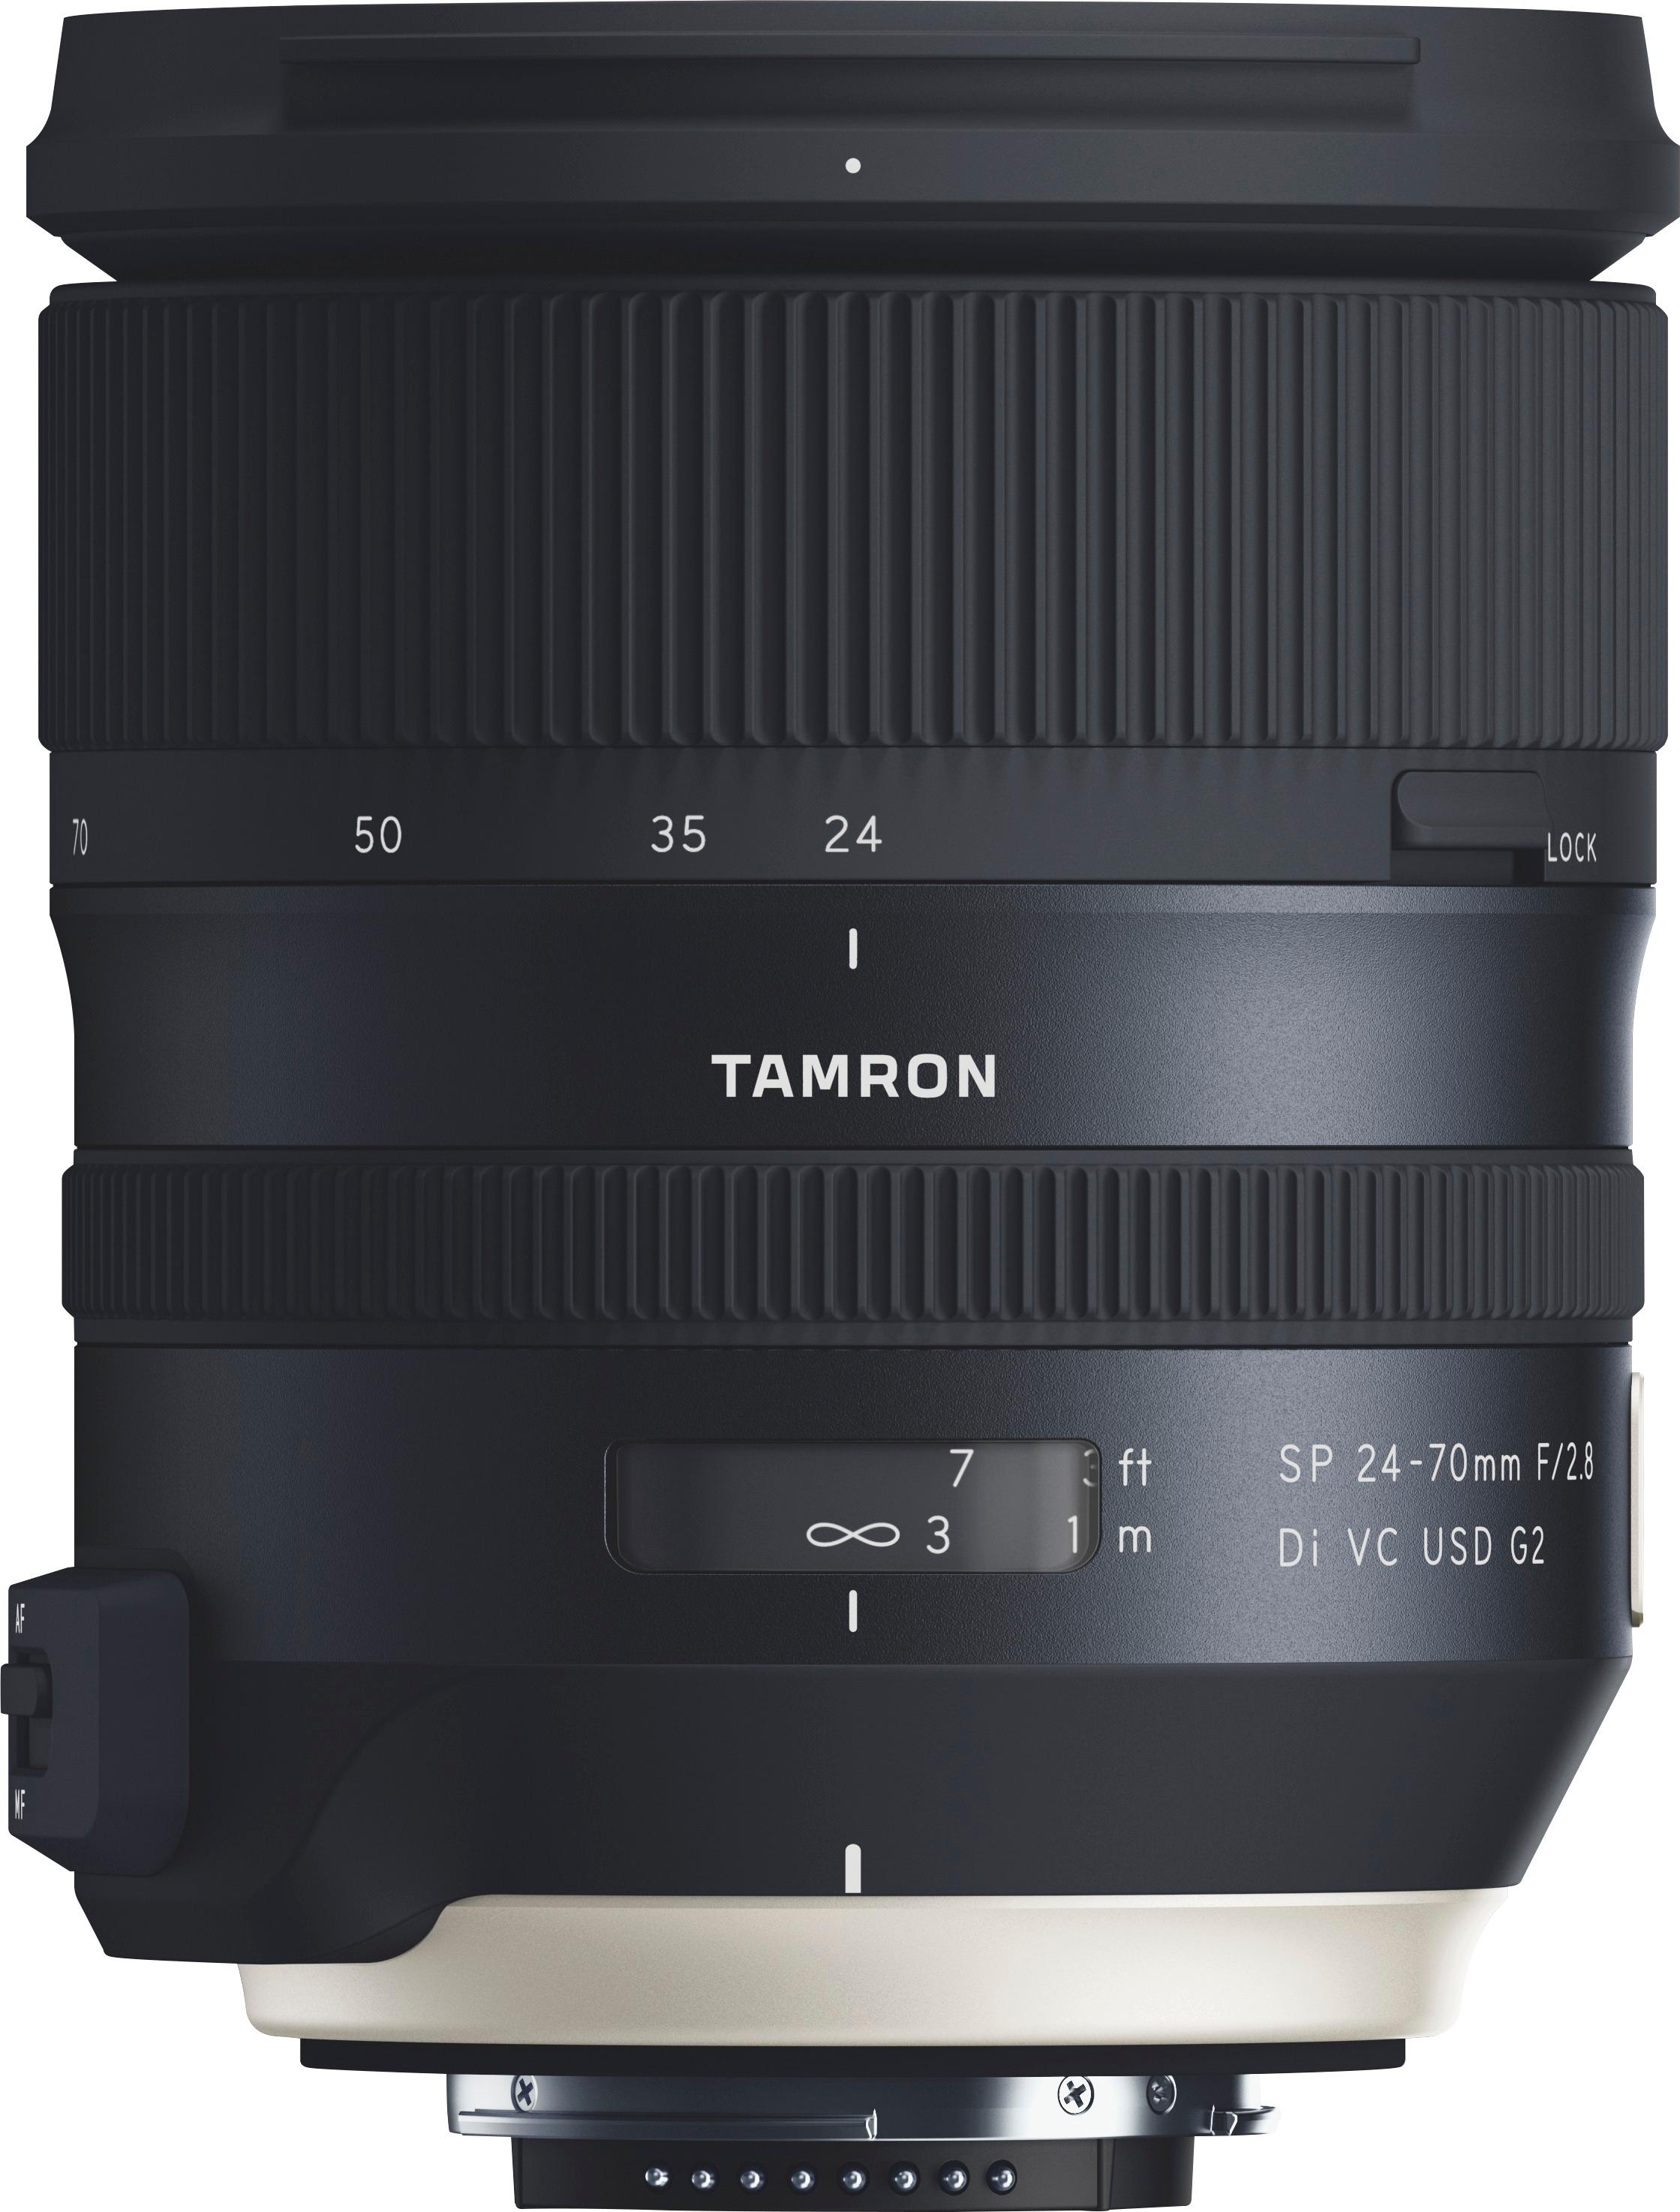 Tamron SP 24-70mm F2.8Di VC USD G2 ニコン用-